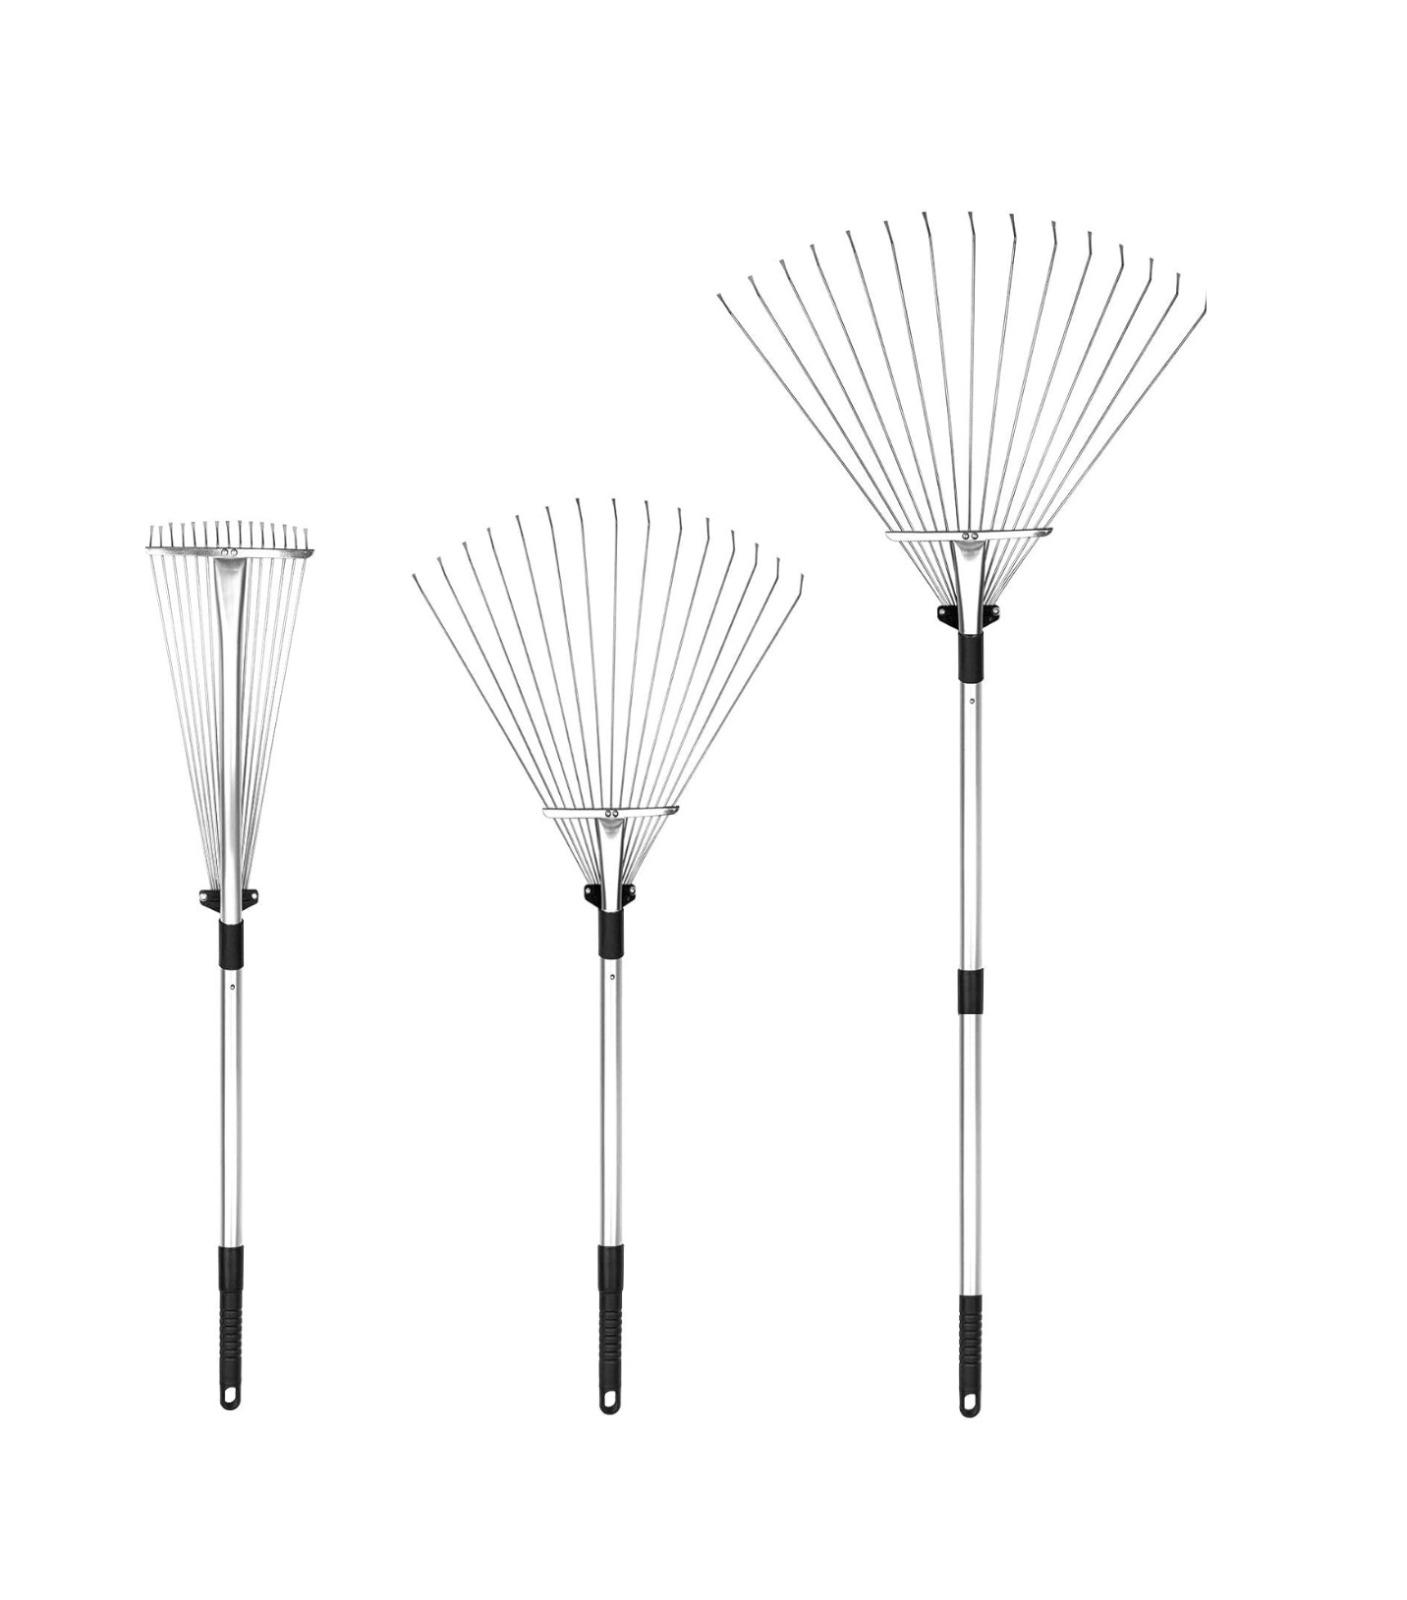 Telescopic Metal Rake, 81 to 161 cm Adjustable Expanding Handle Rake for Quick Clean Up of Lawn and Yard, Garden Leaf Rake and Roof | Garden Broom with Long Handle for Leaves